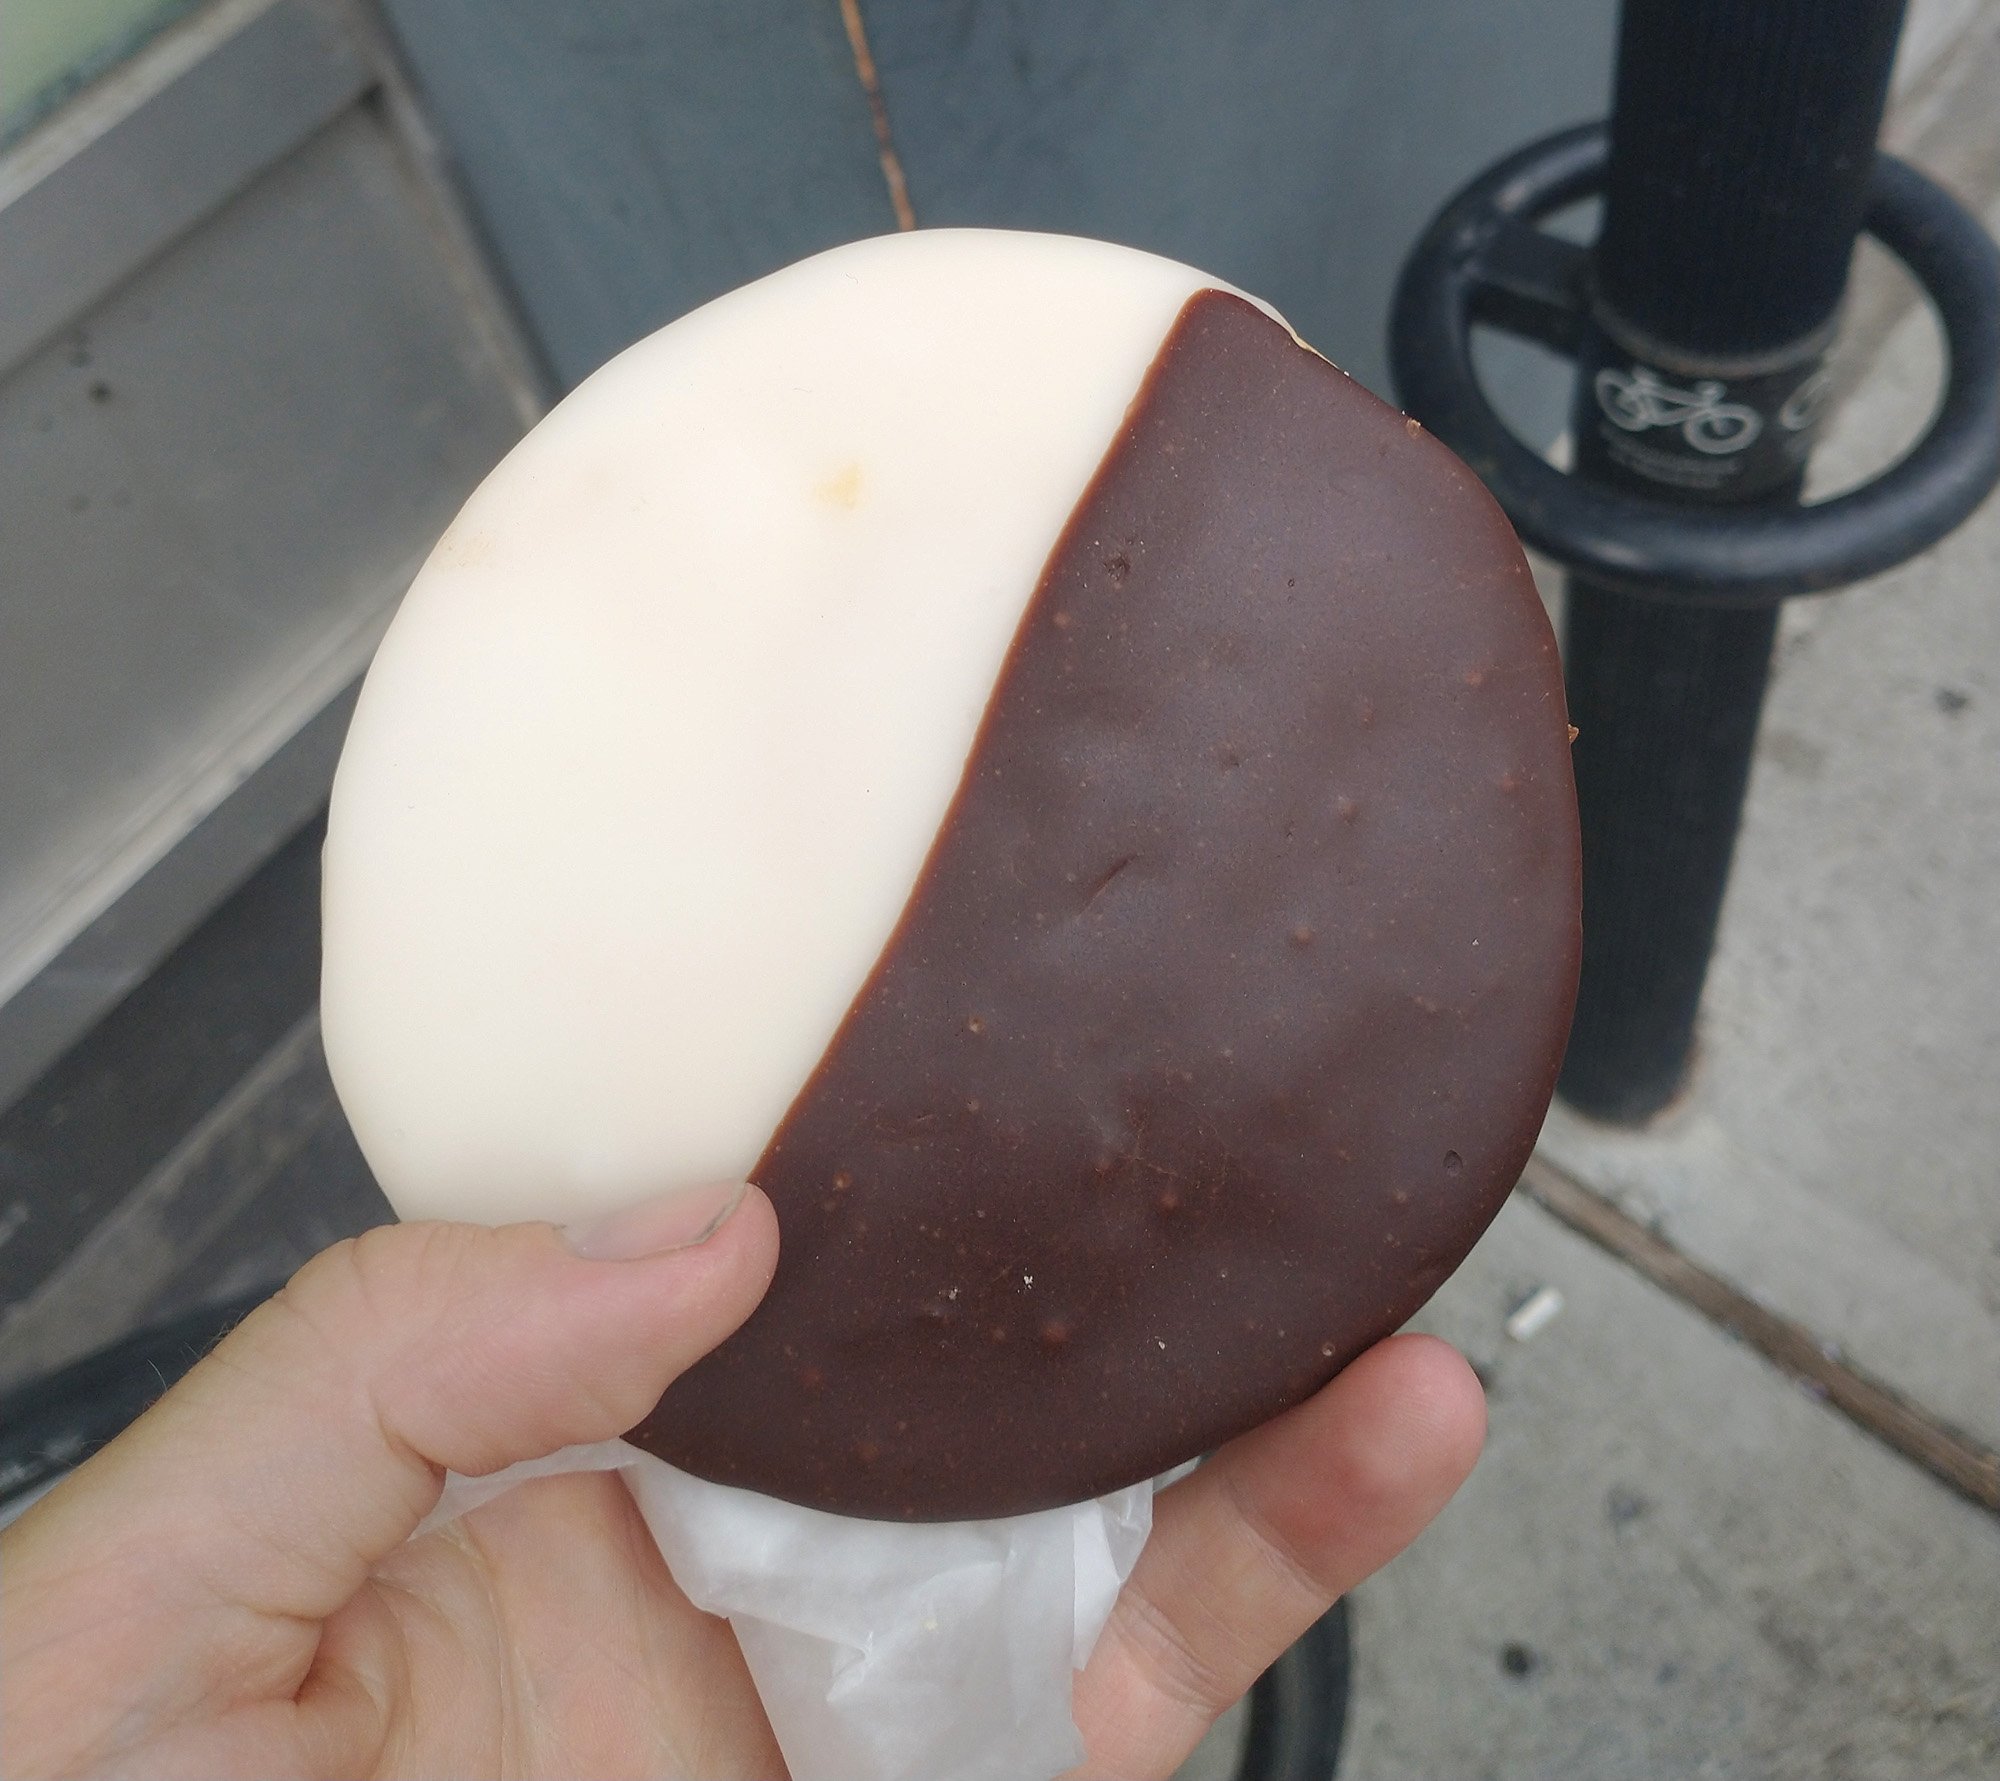 Got myself a Black and White cookie as consolation prize. LOOK TO THE COOKIE, ELAINE.